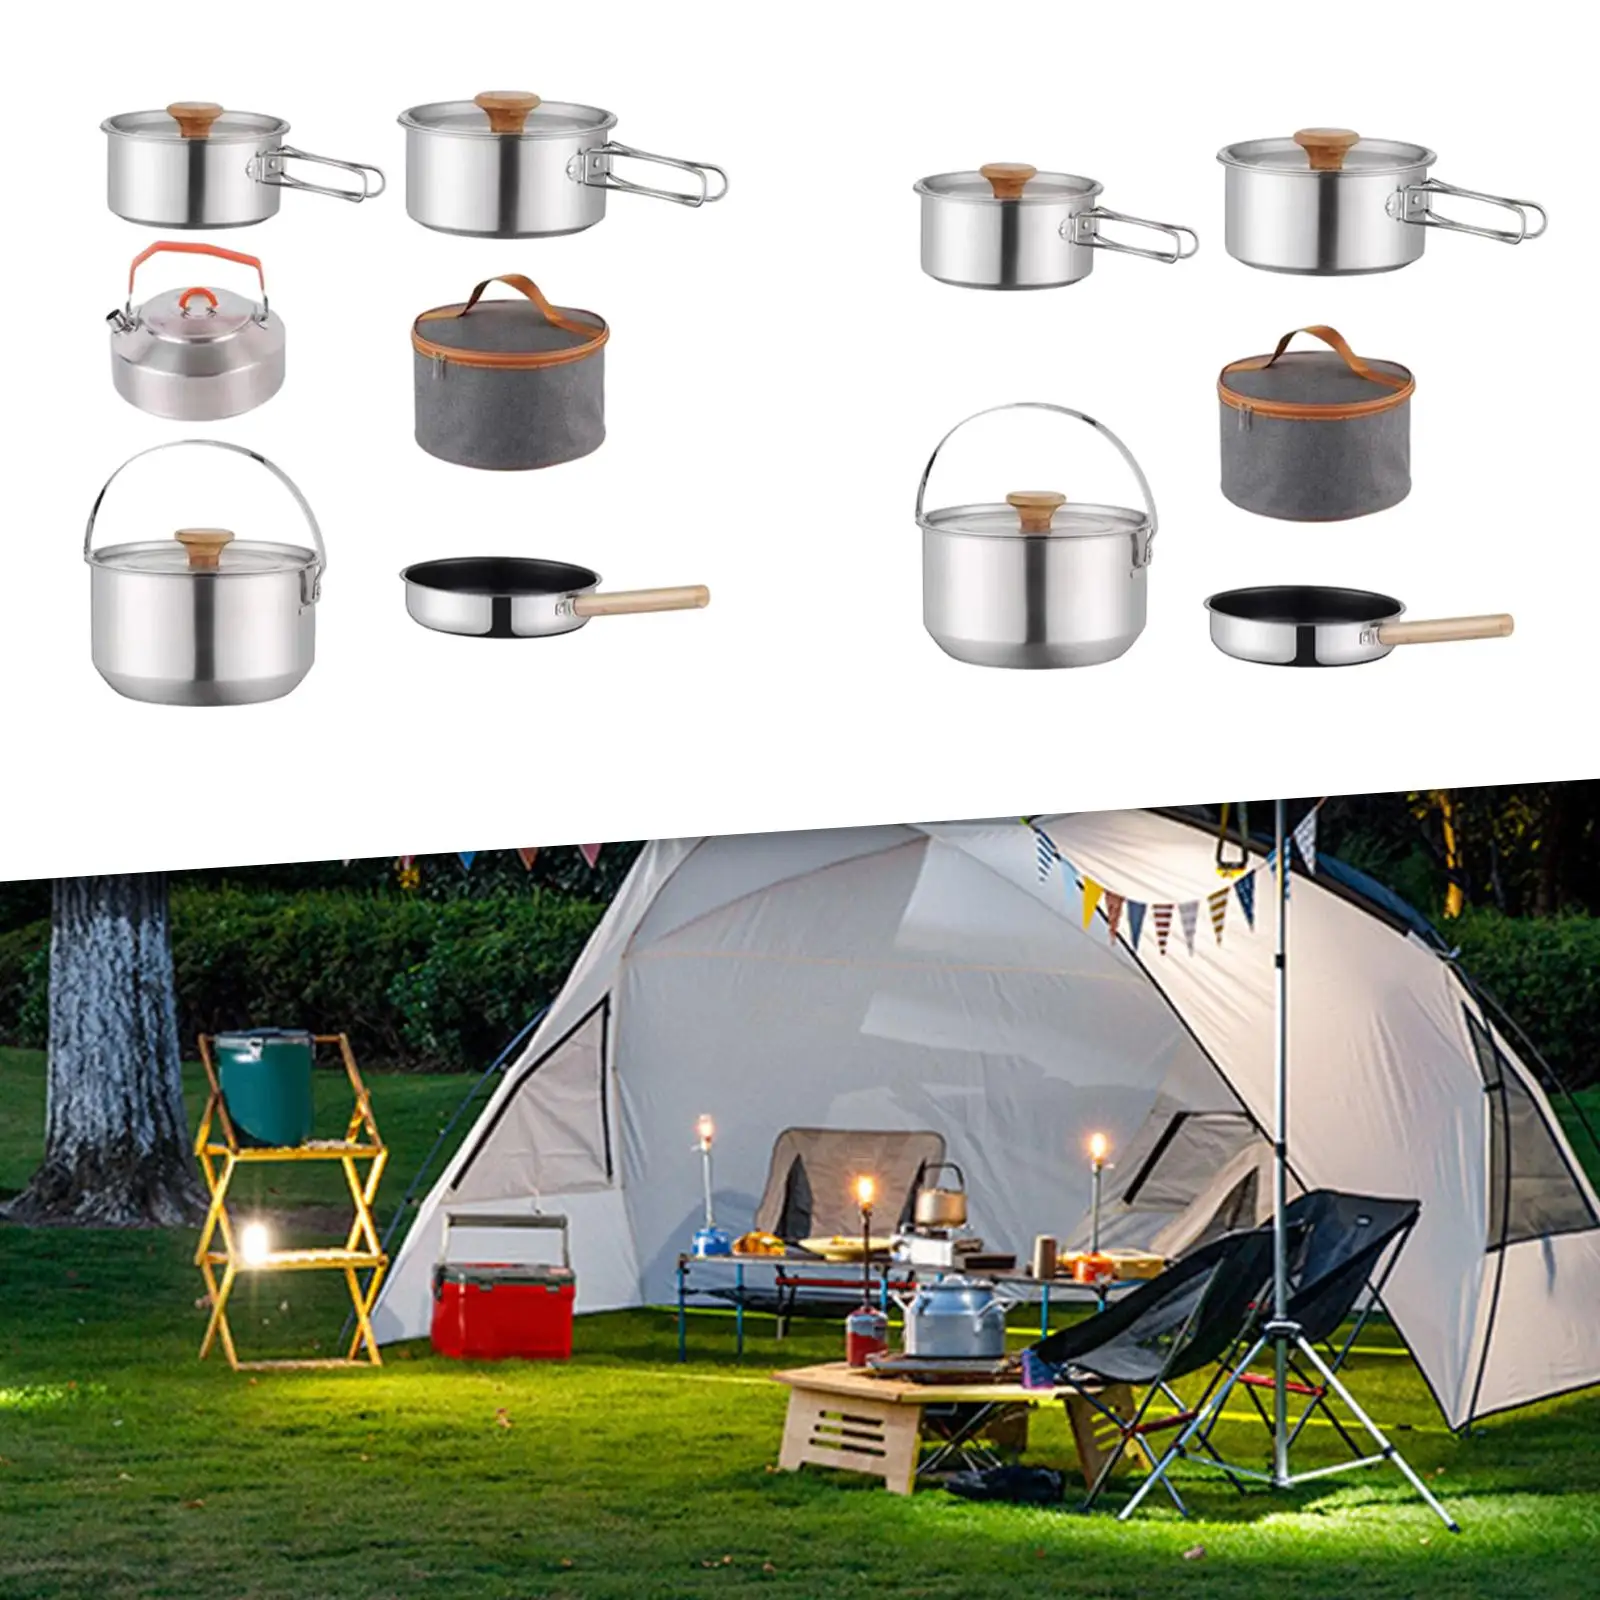 Camping Cookware Kit Portable Frying Pan Tableware Picnic Family Cookset